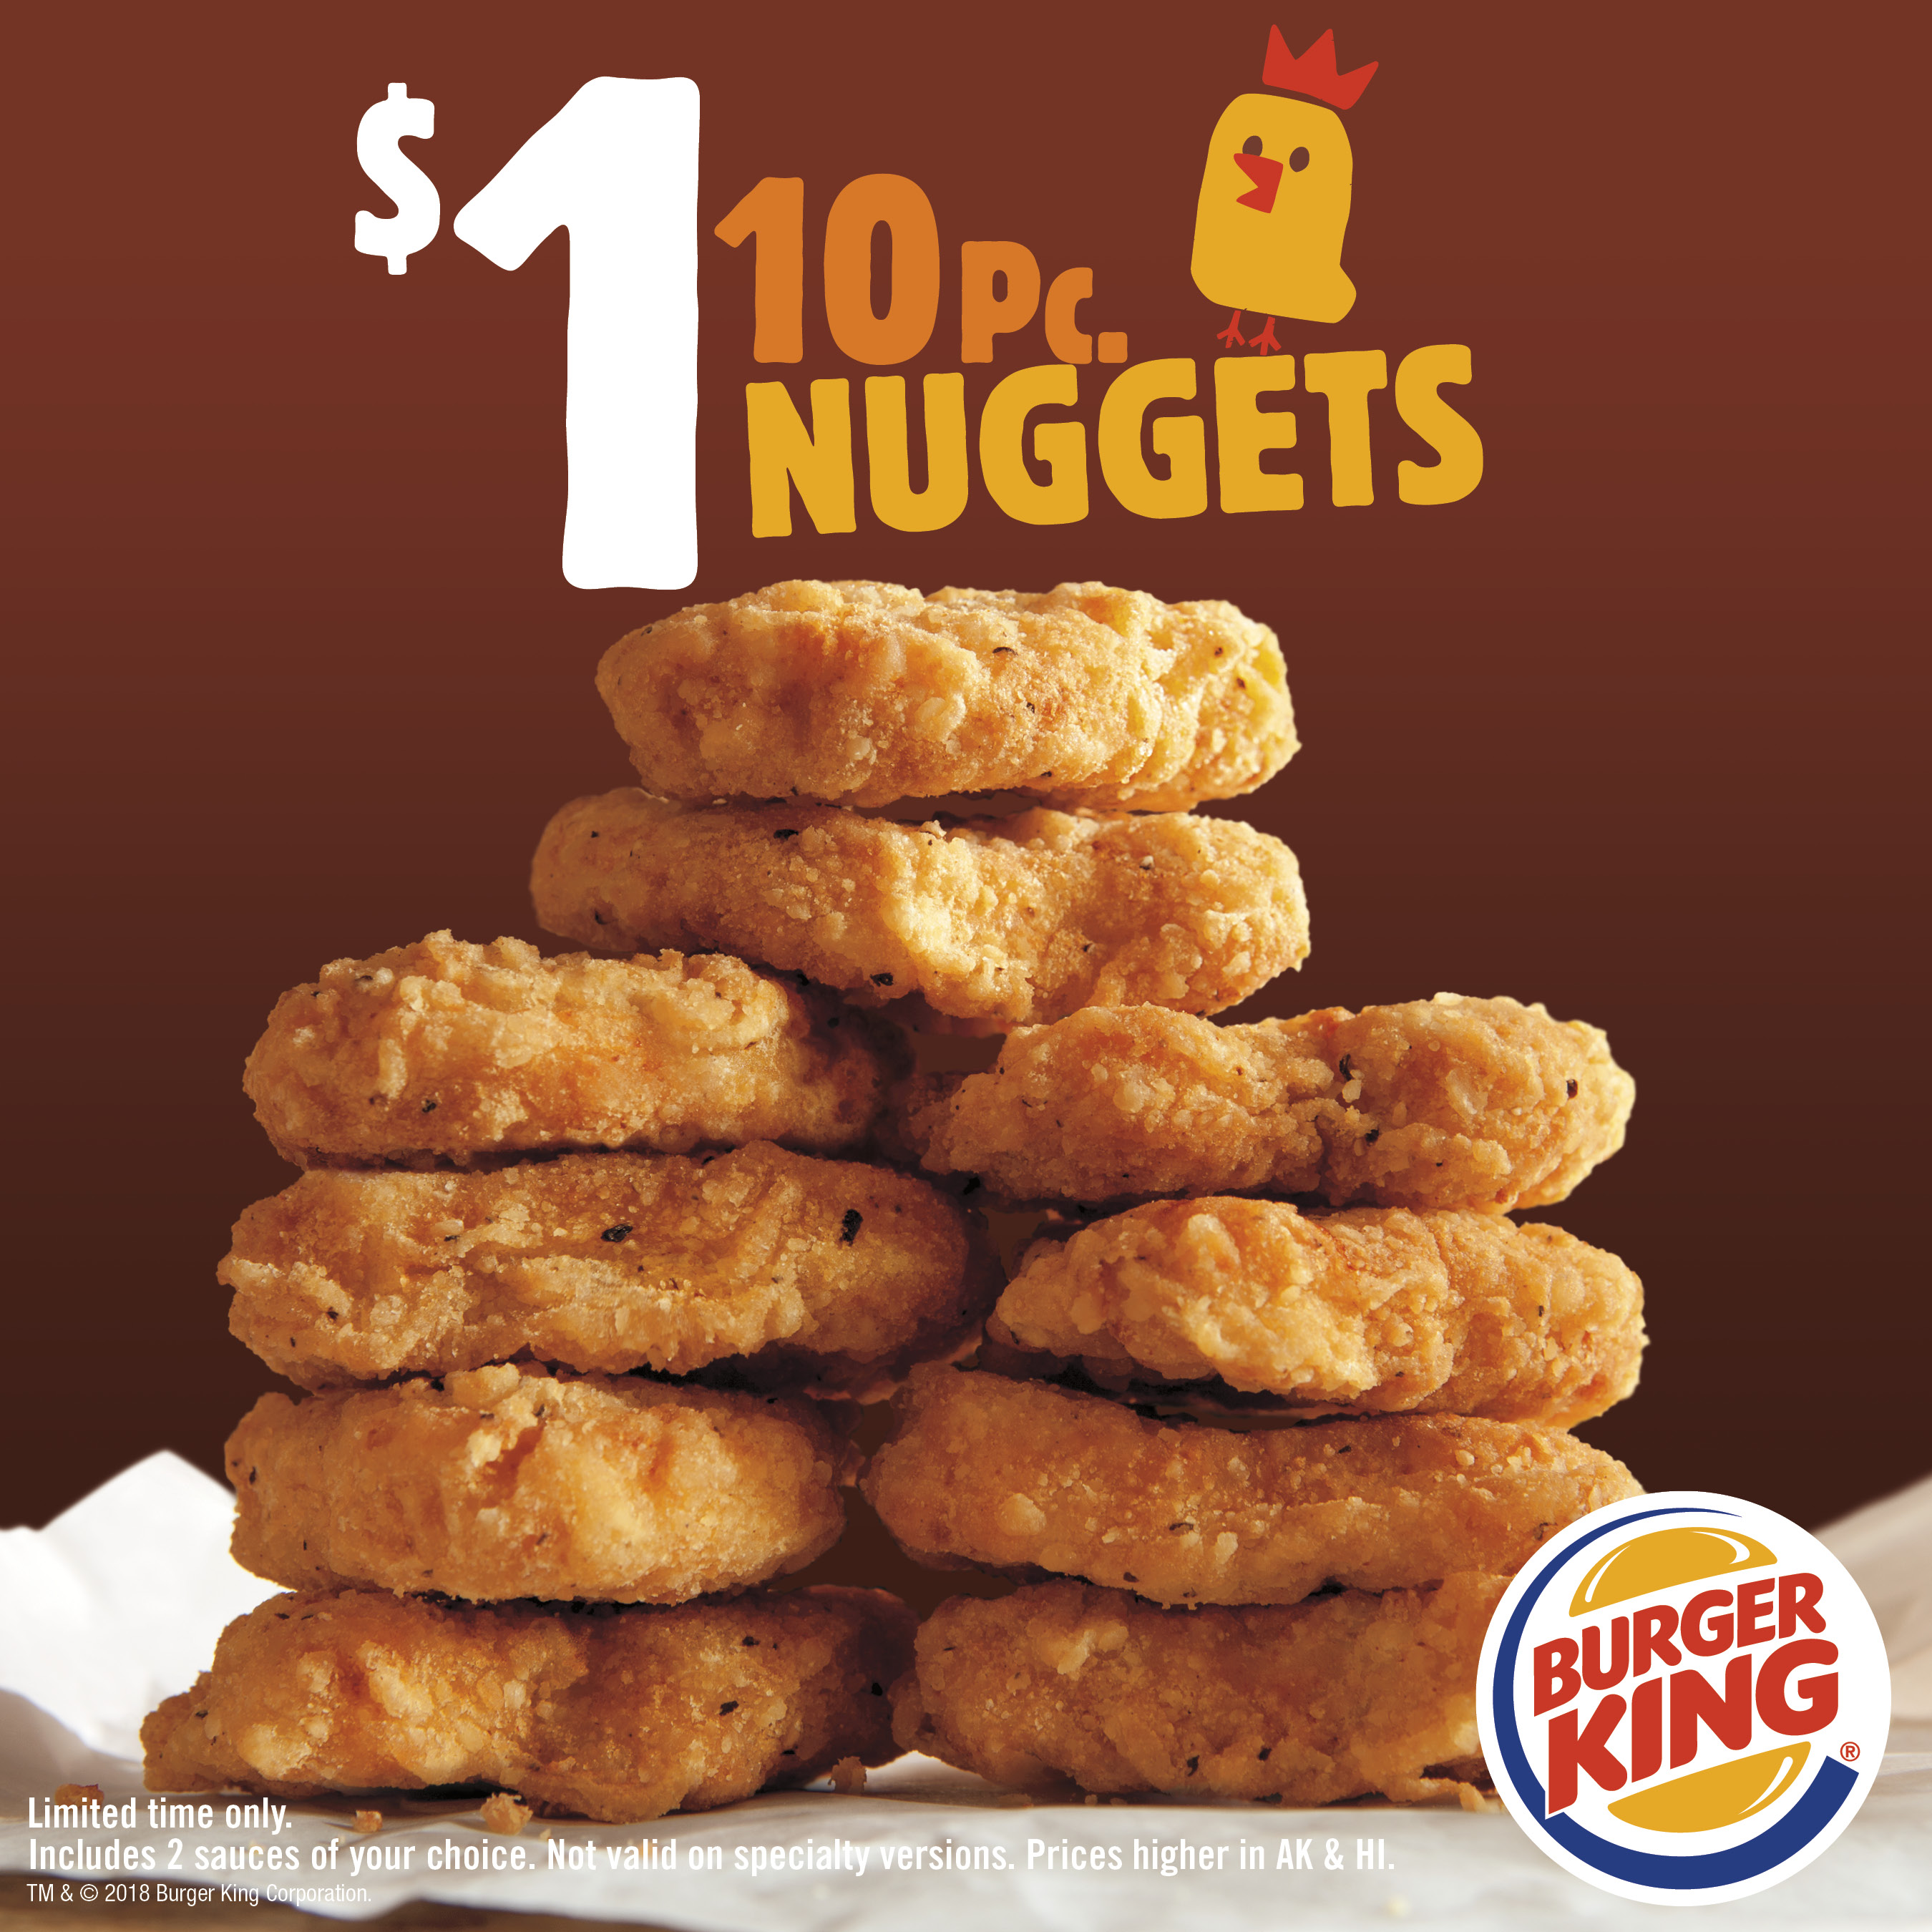 Burger King Chicken Nuggets For One Dollar